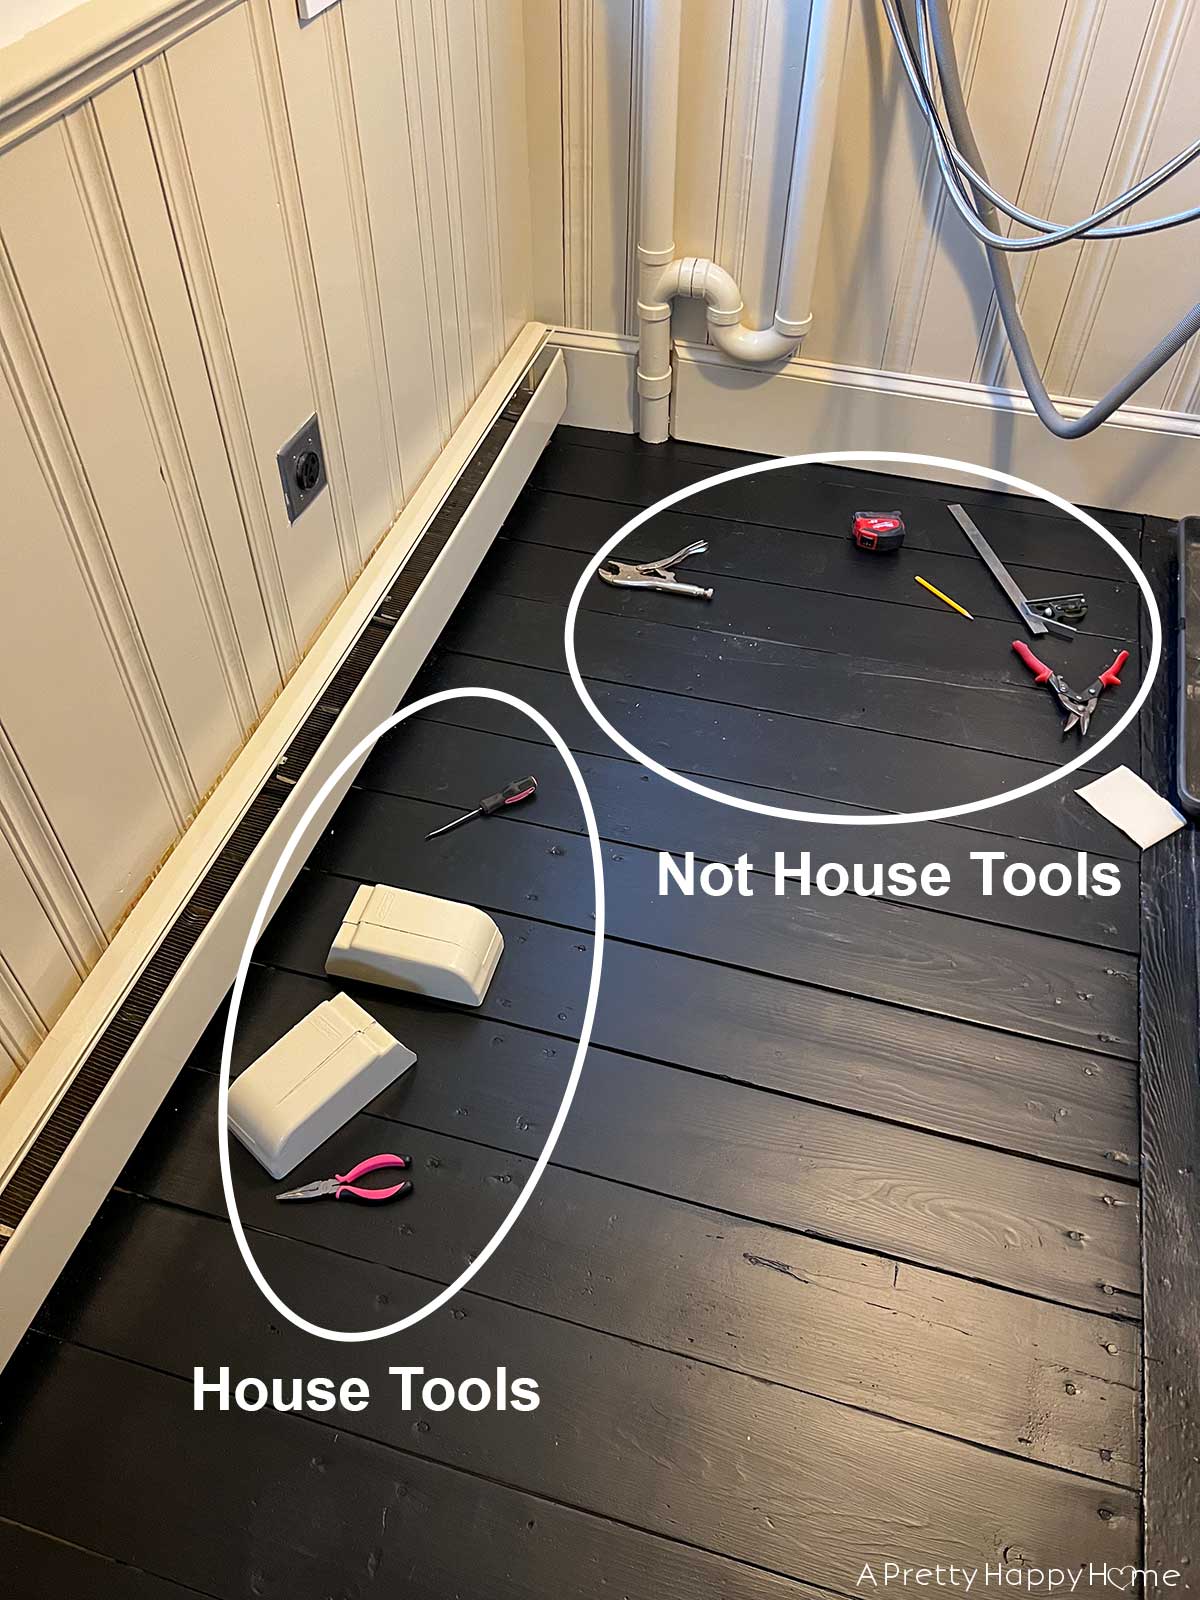 Why You Need House Tools In a Distinct Color keeping a set of house tools in a distinct color makes them easily identifiable and they are convenient for small households tasks